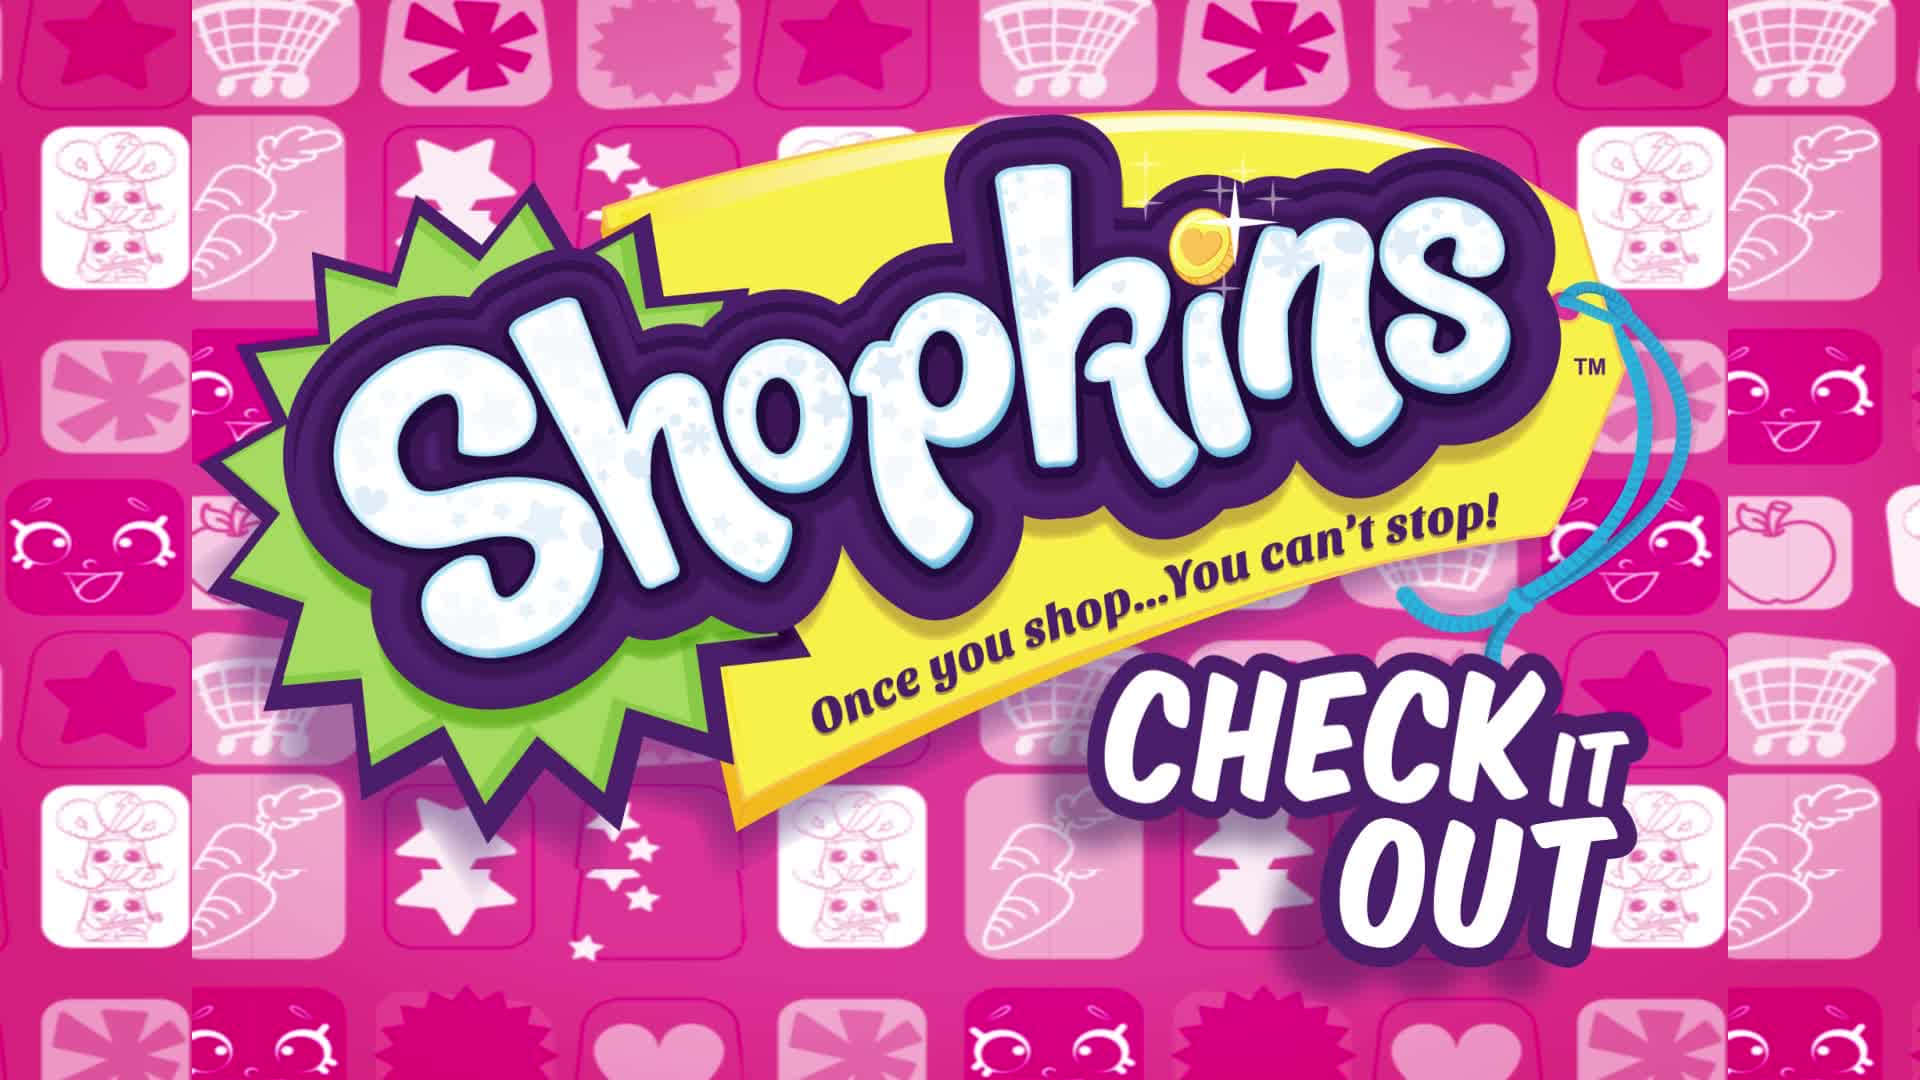 Have Fun With All Your Favorite Shopkins! Background